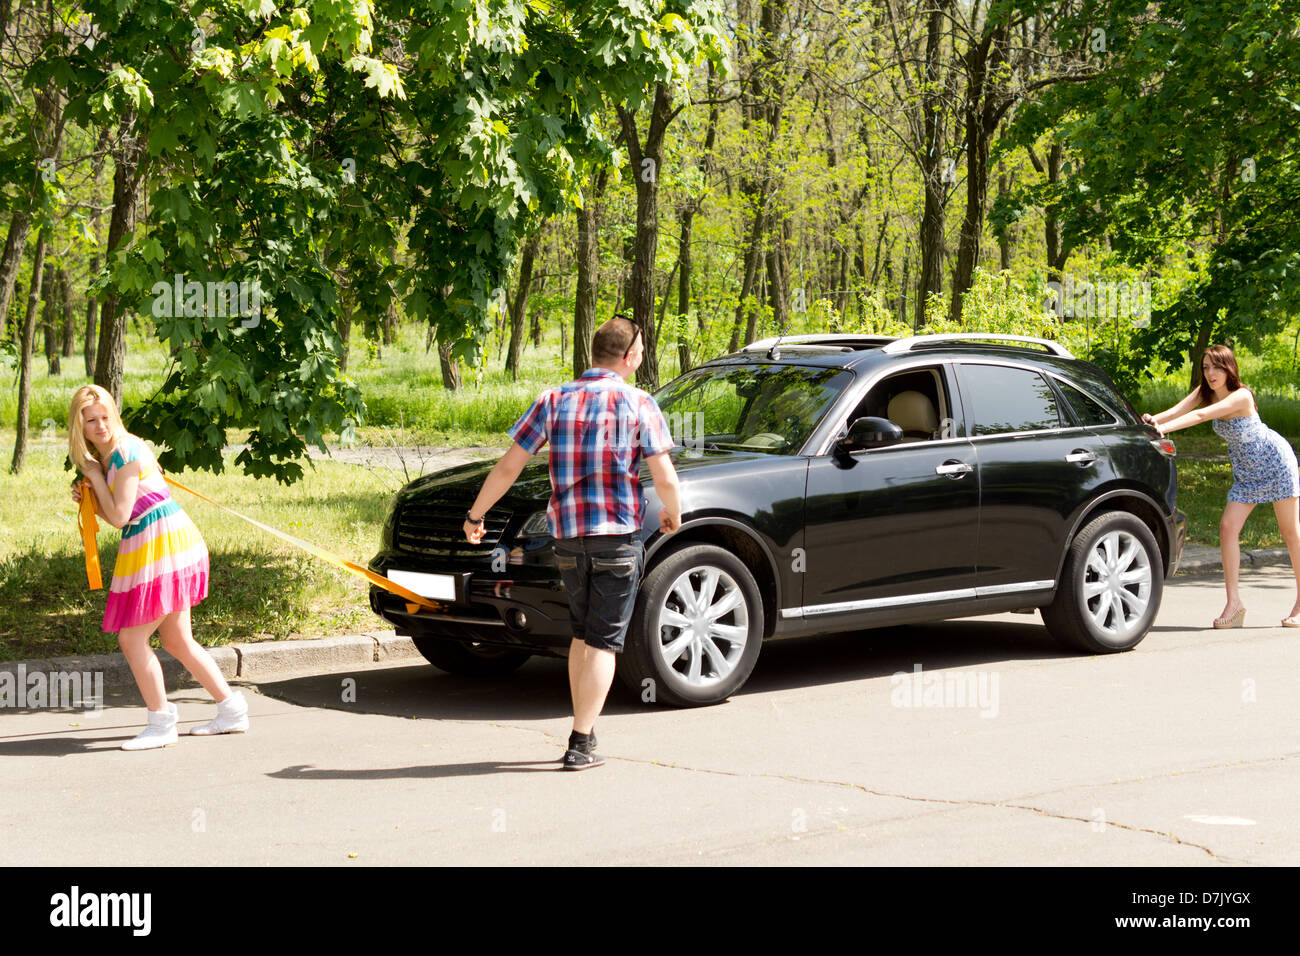 Image of beautiful females pulling and pushing a broken down car in the middle of their journey. Stock Photo